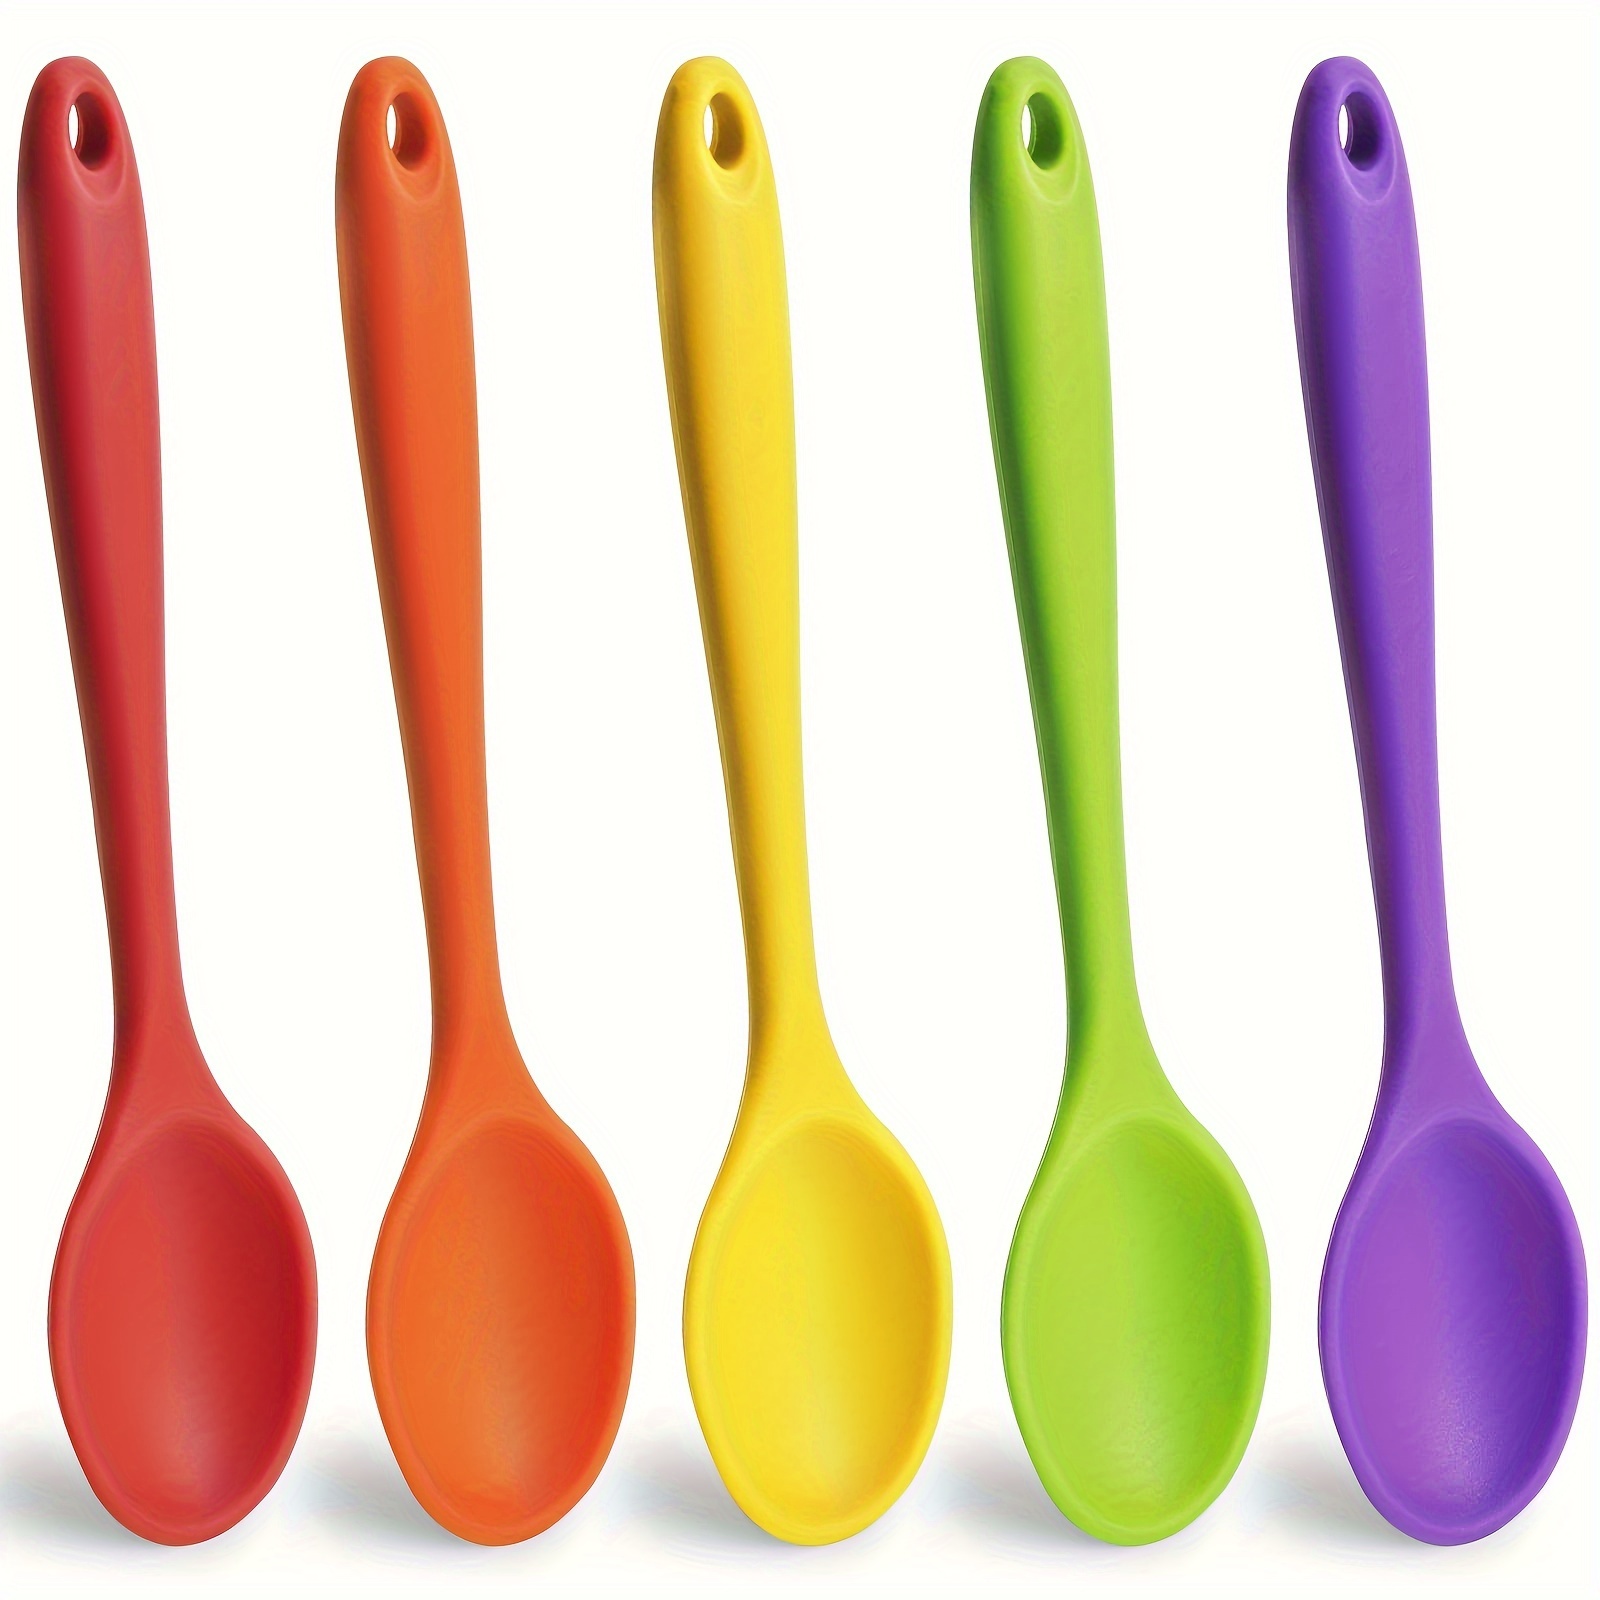 

5pcs, Spoon, Small Silicone Spoons, 8inch Heat Resistant Spoons, Nonstick Kitchen Spoons, Silicone Tea Spoon For Kitchen Cooking Baking Stirring, Kitchen Stuff